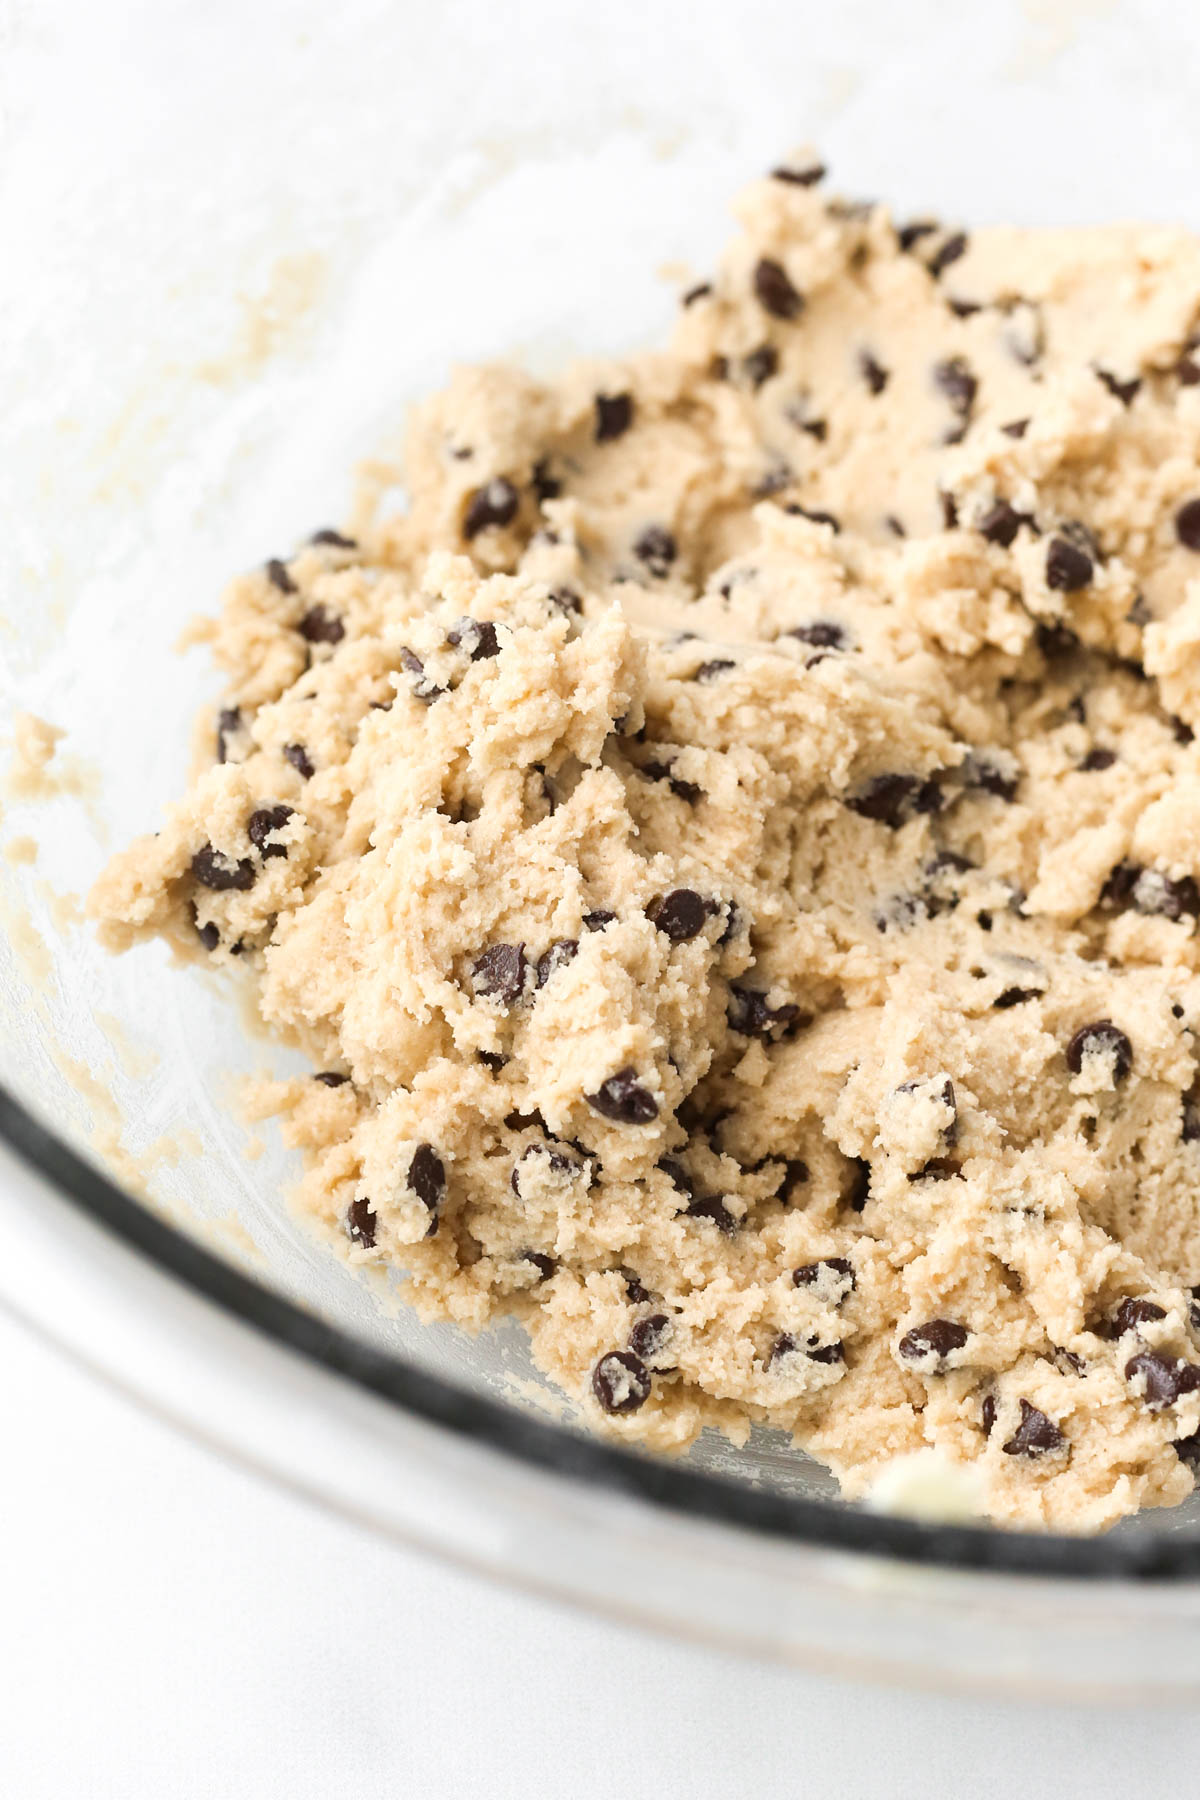 Close-up of no bake chocolate chip cookie dough in a mixing bowl with mini chocolate chips mixed in.